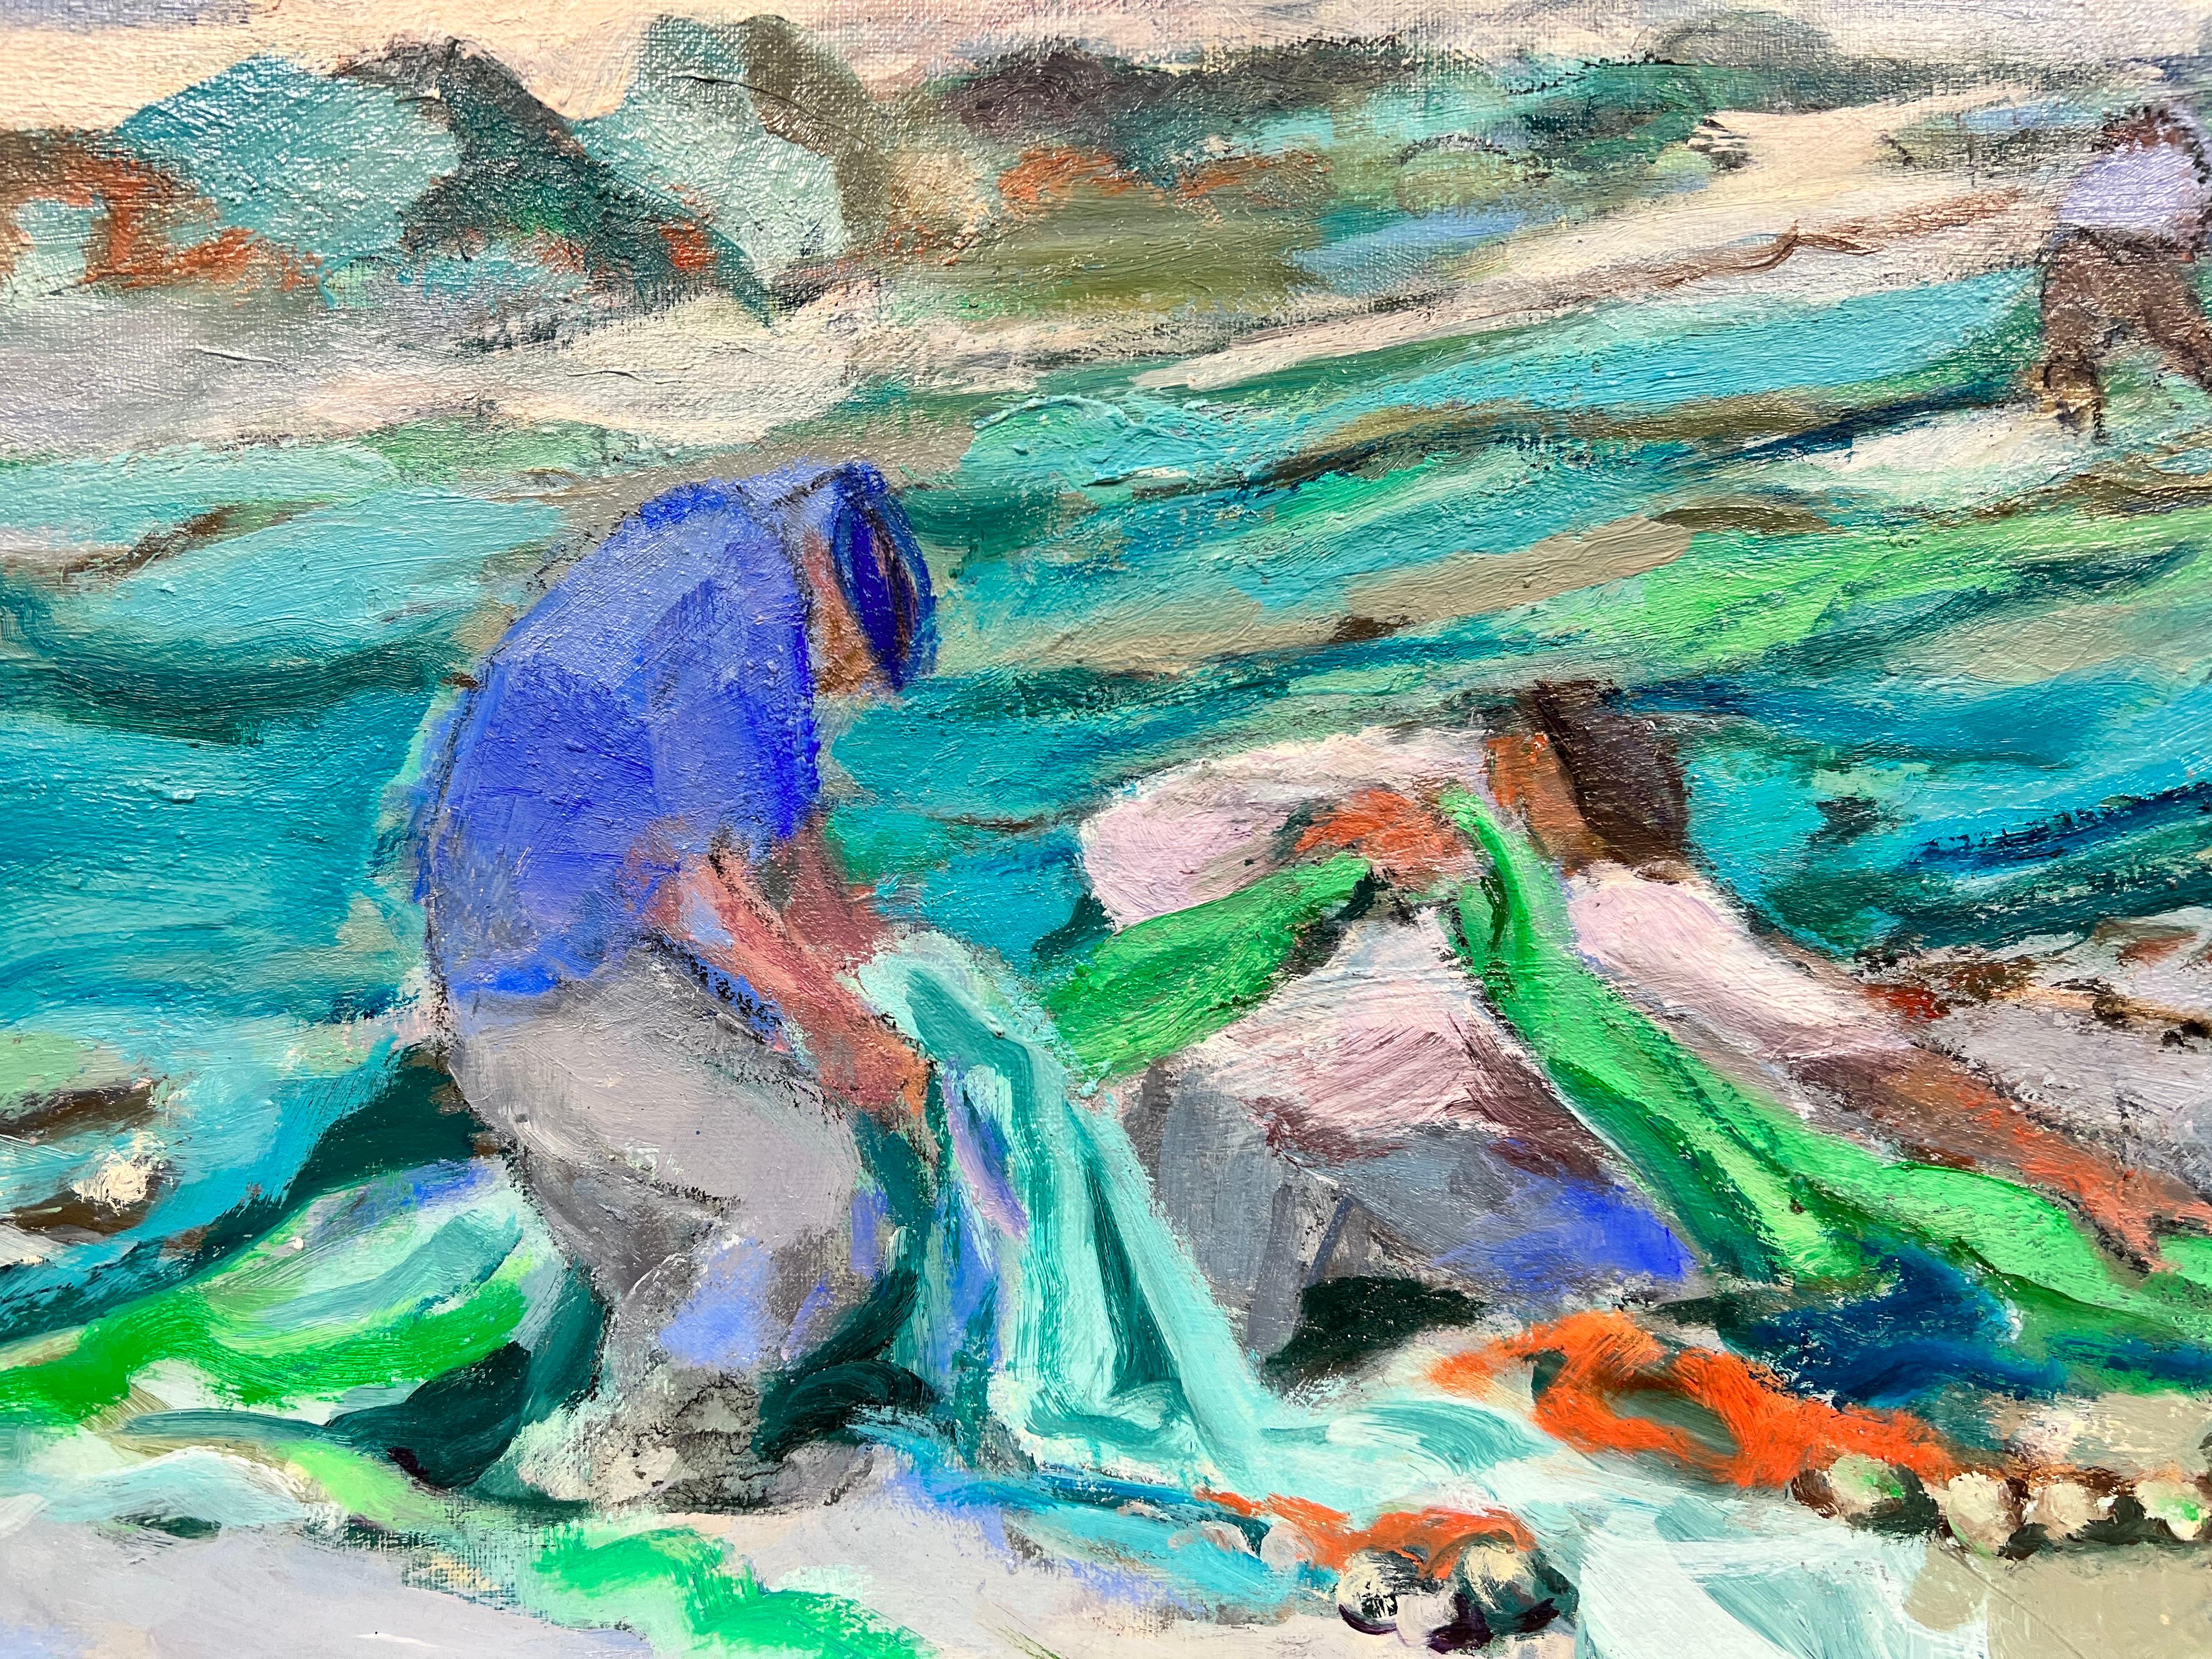 Tending their Nets
French School, contemporary
oil on canvas
15 x 21.5 inches
provenance: private collection, France
The painting is in very good and presentable condition.
